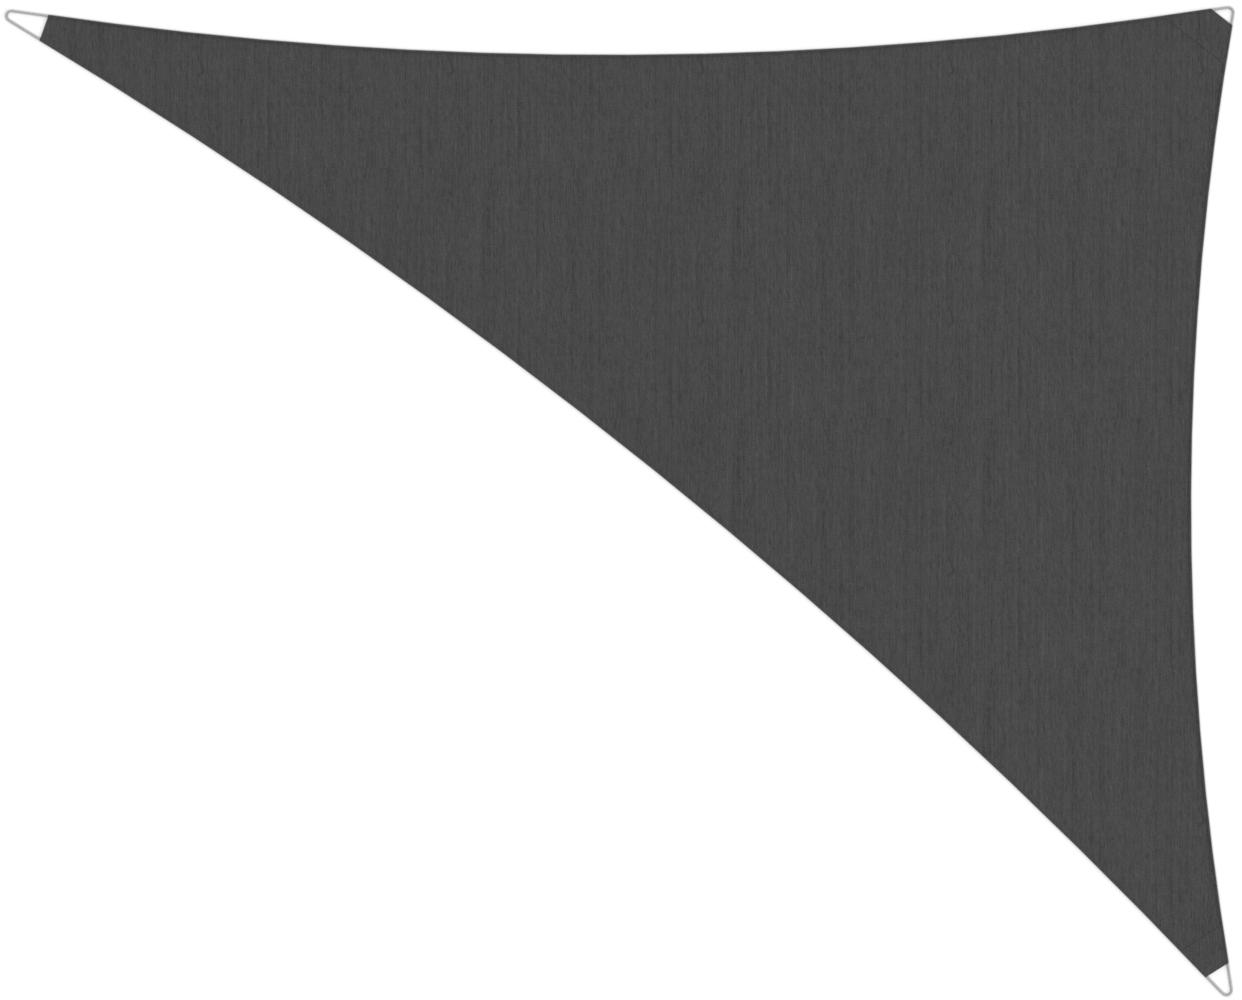 Ingenua shade sail Triangle 4 x 5 x 6,4 m, for outdoor use. Colour of the fabric shade sail Flanelle.